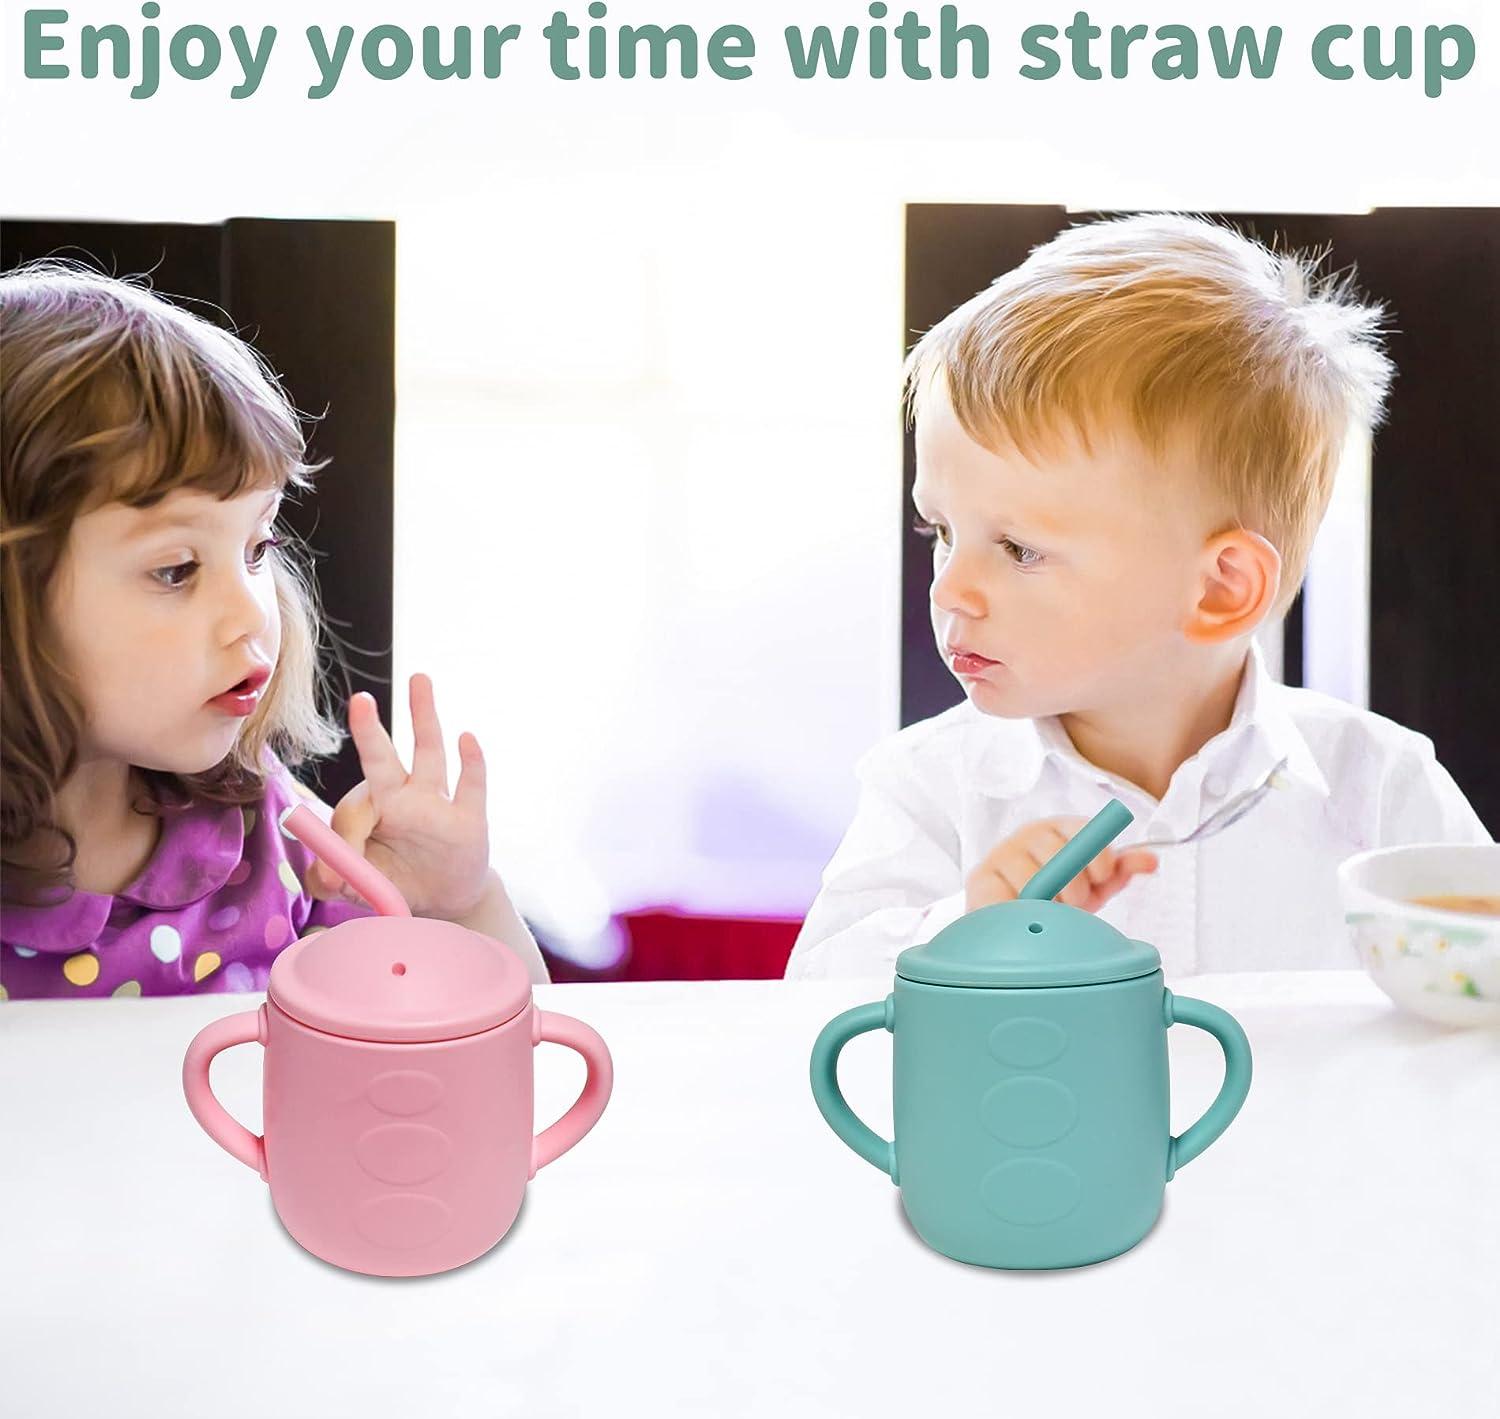 Adocham 100% Silicone Baby Cup With Straw & 2 Handles Food Grade